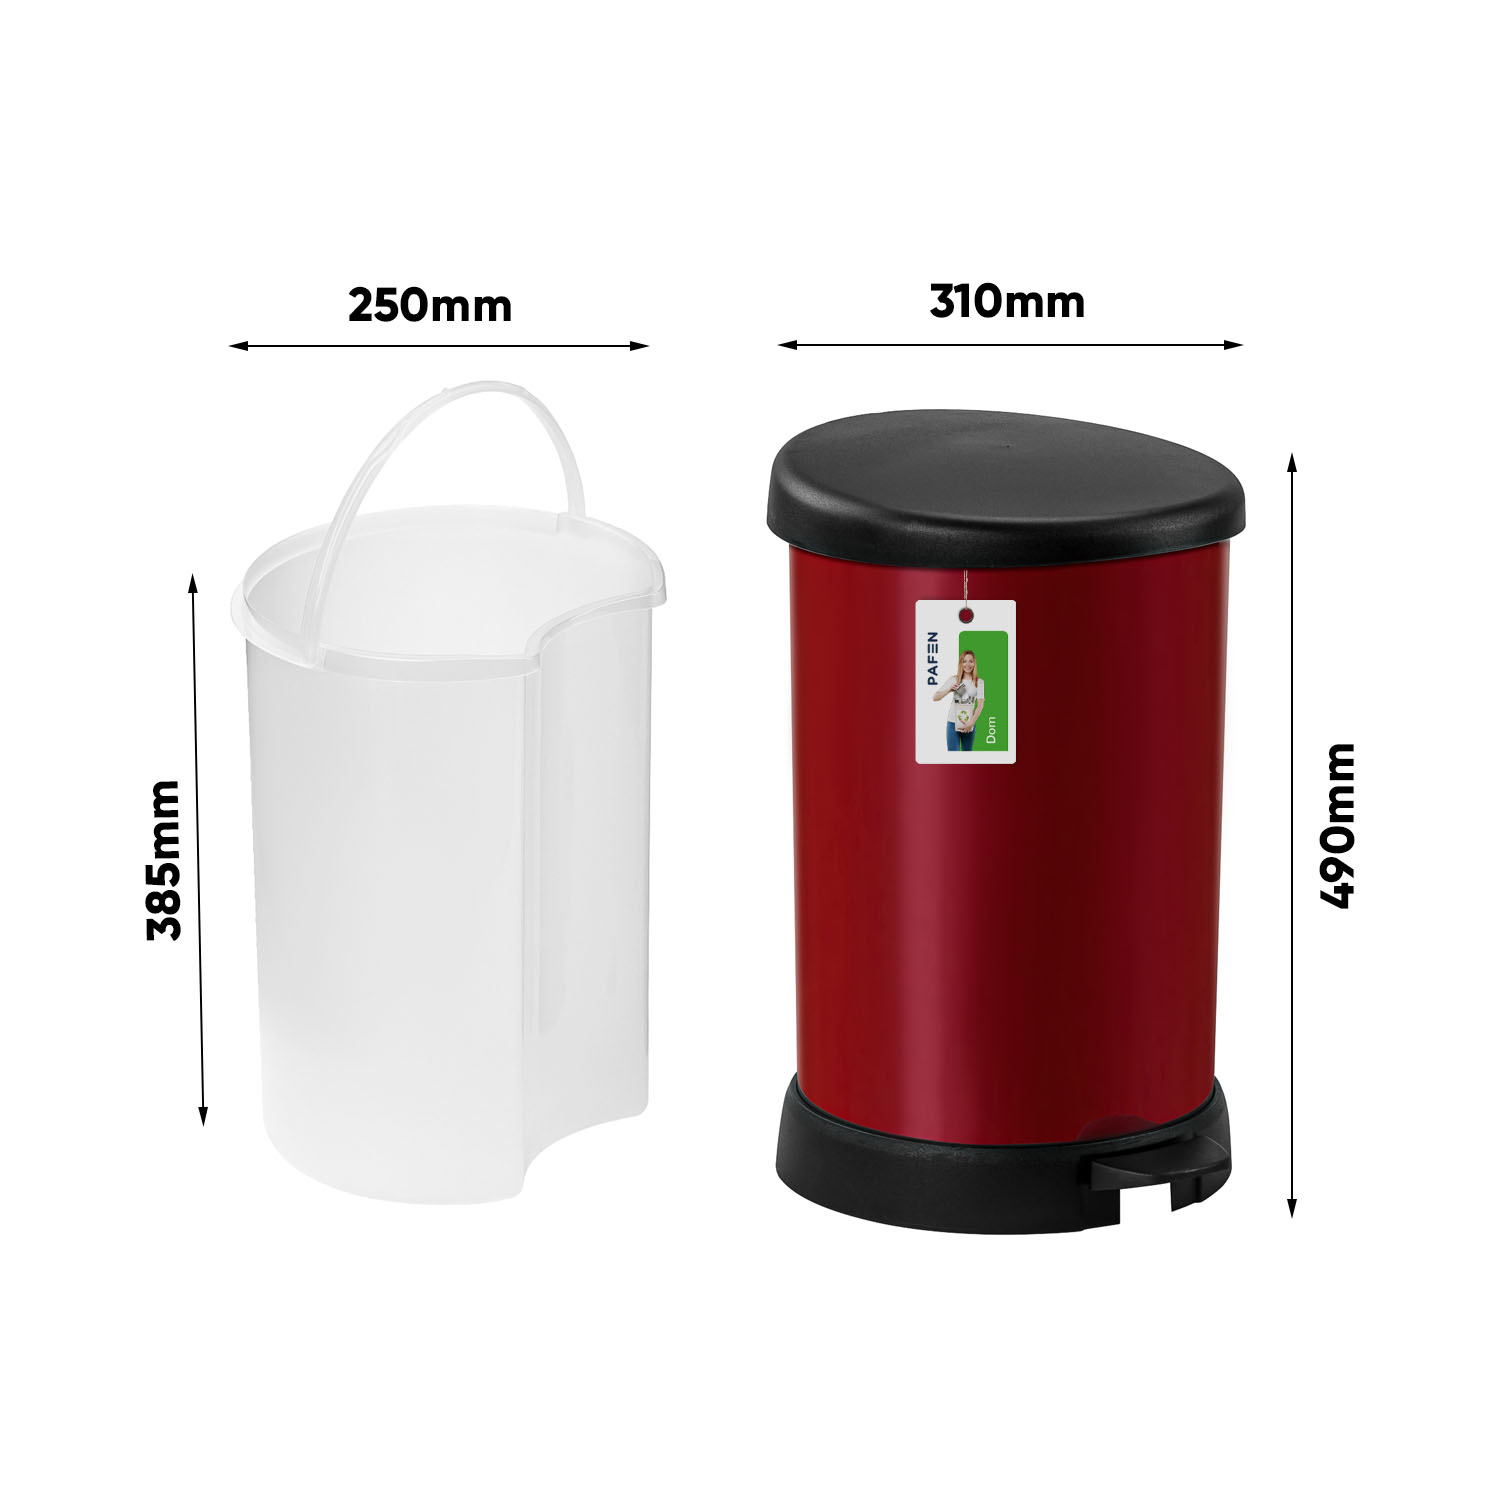 Wymiary Delor waste basket Red (1)